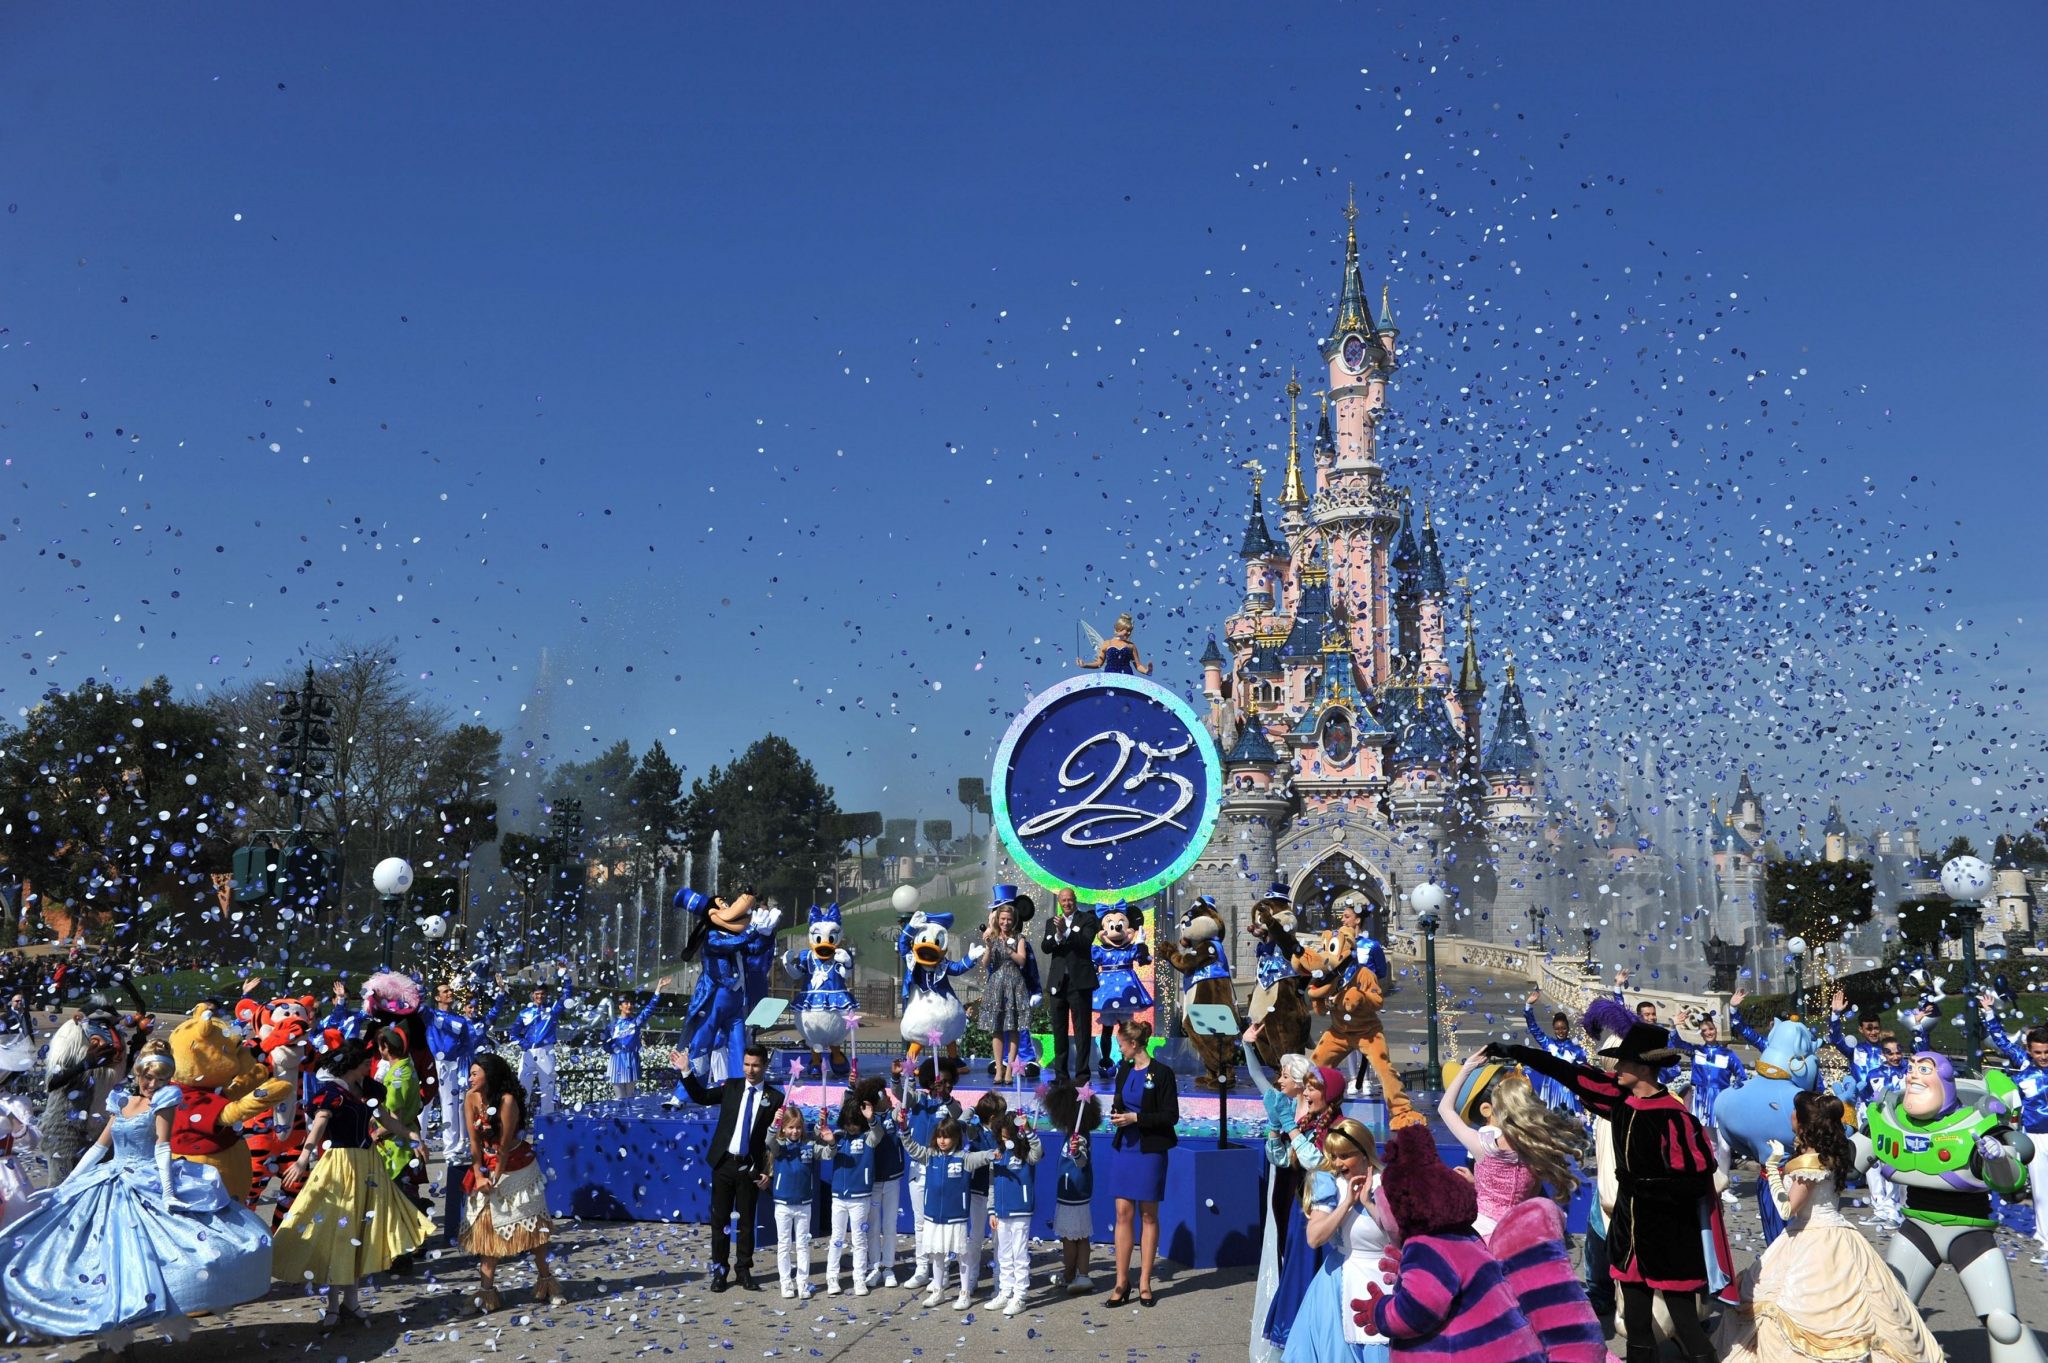 Disneyland Paris Launches 25th Anniversary With Stars and Sparkles!